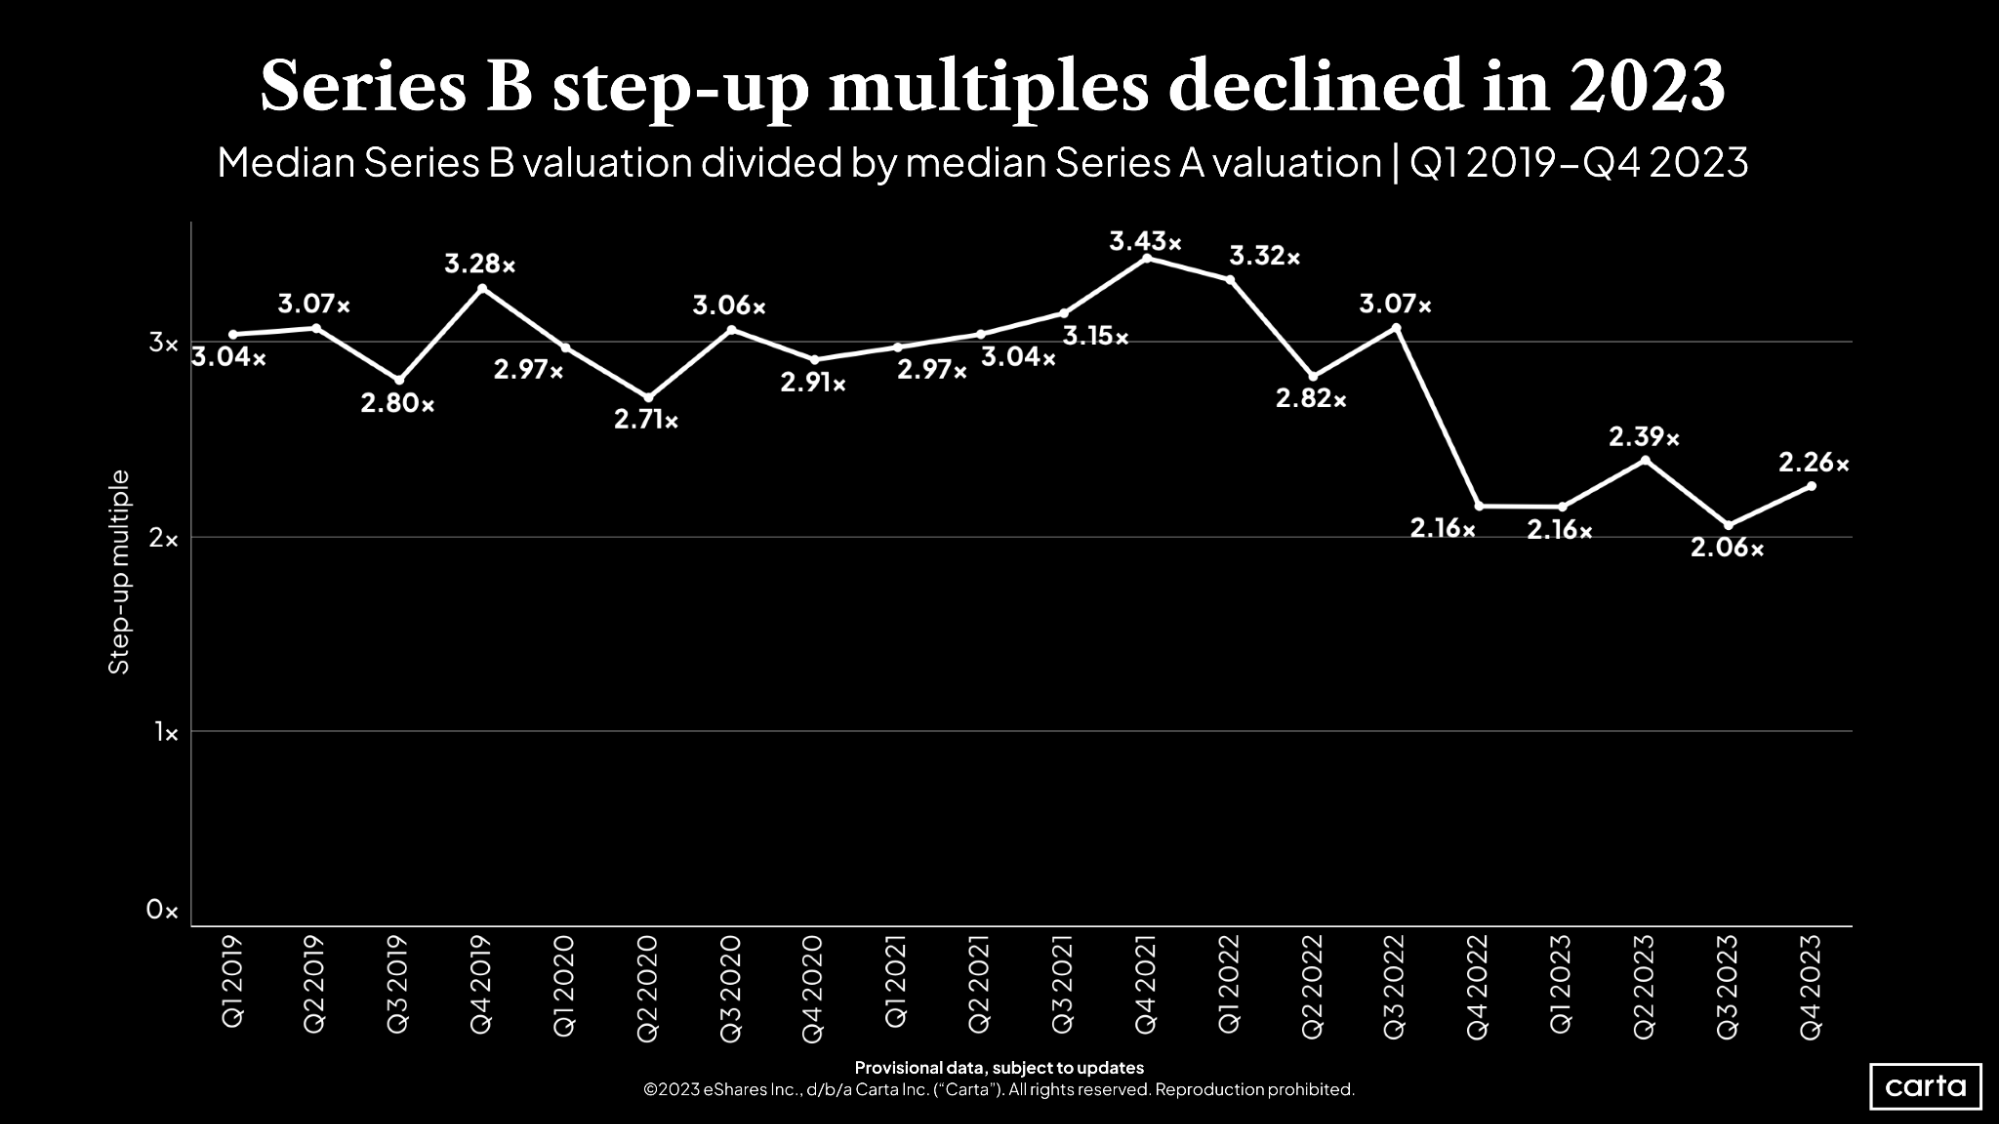 Series B step-up multiples declined in 2023